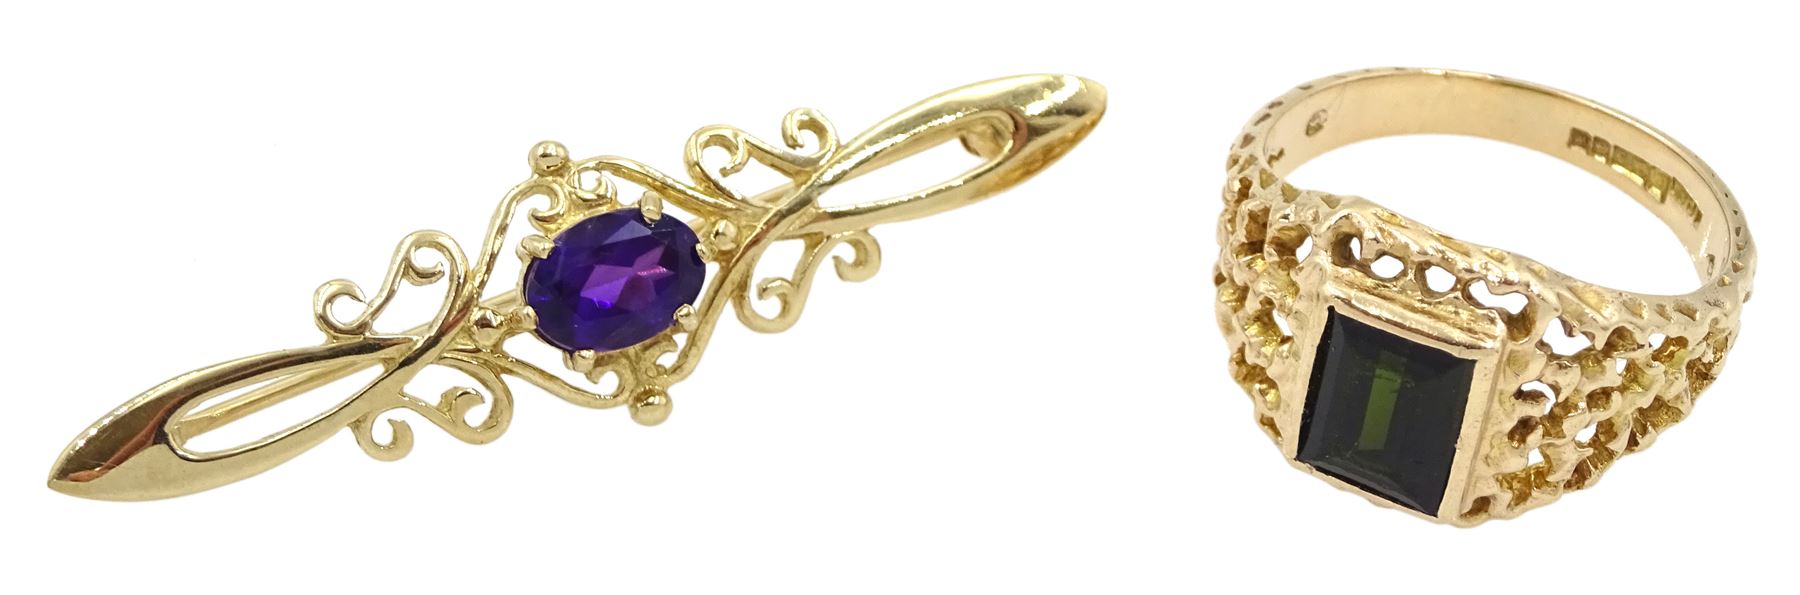 Gold green paste pierced ring and a gold oval amethyst openwork brooch